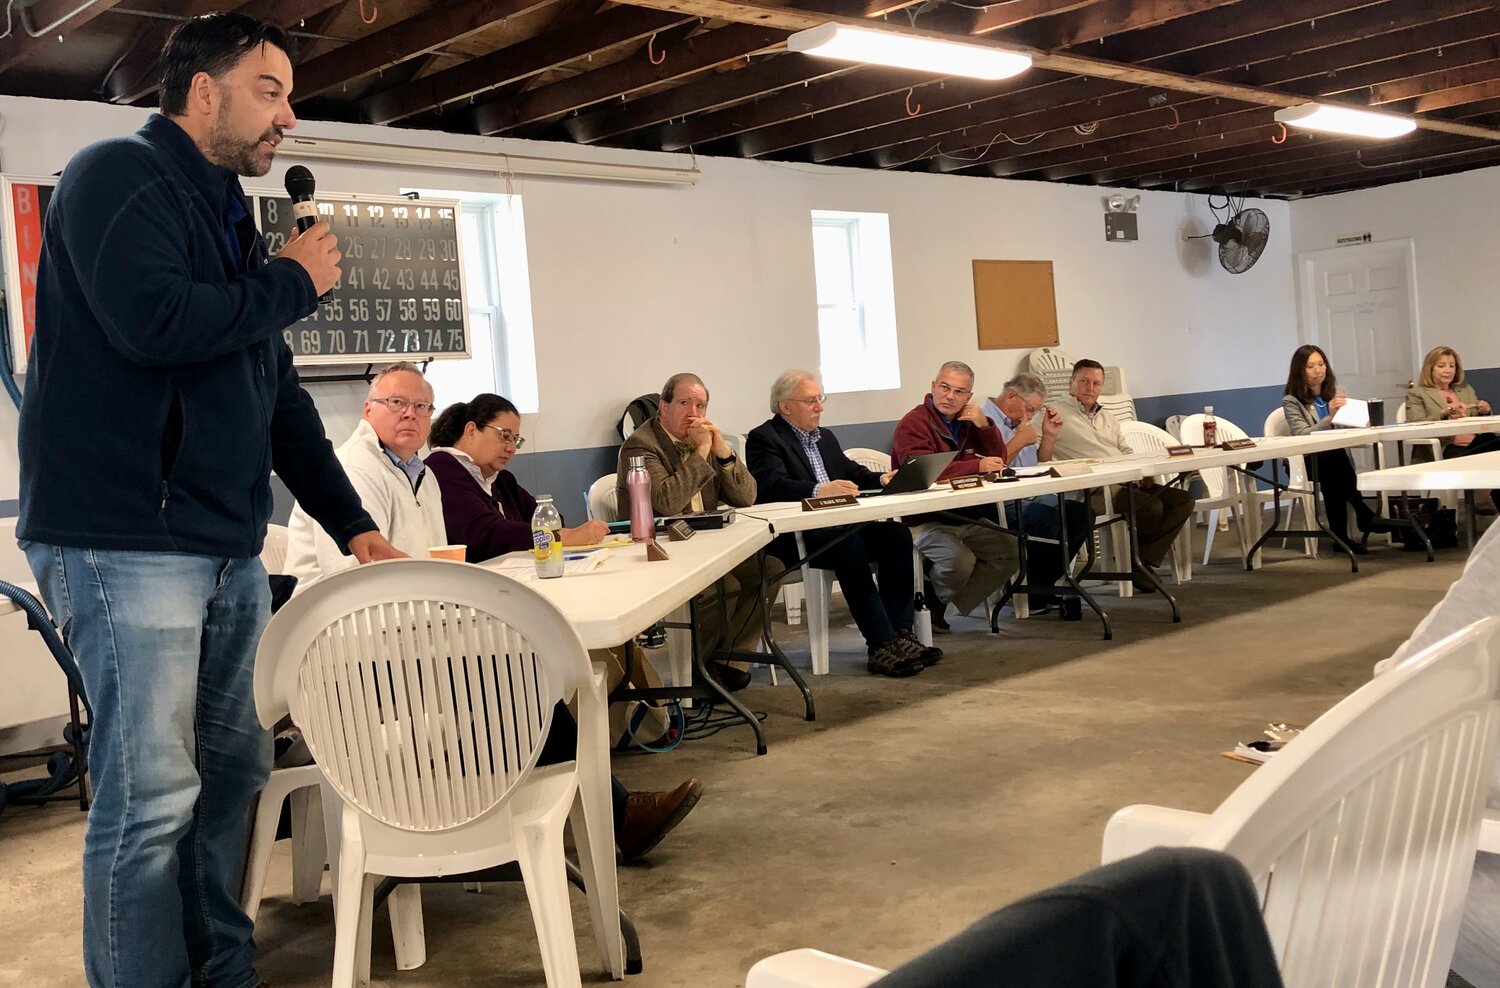 Jacques Afonso of Rhode Island Energy updates Prudence Island residents on the agency’s recent work on the island during a Town Council meeting in the Prudence Island Improvement Hall Saturday morning.